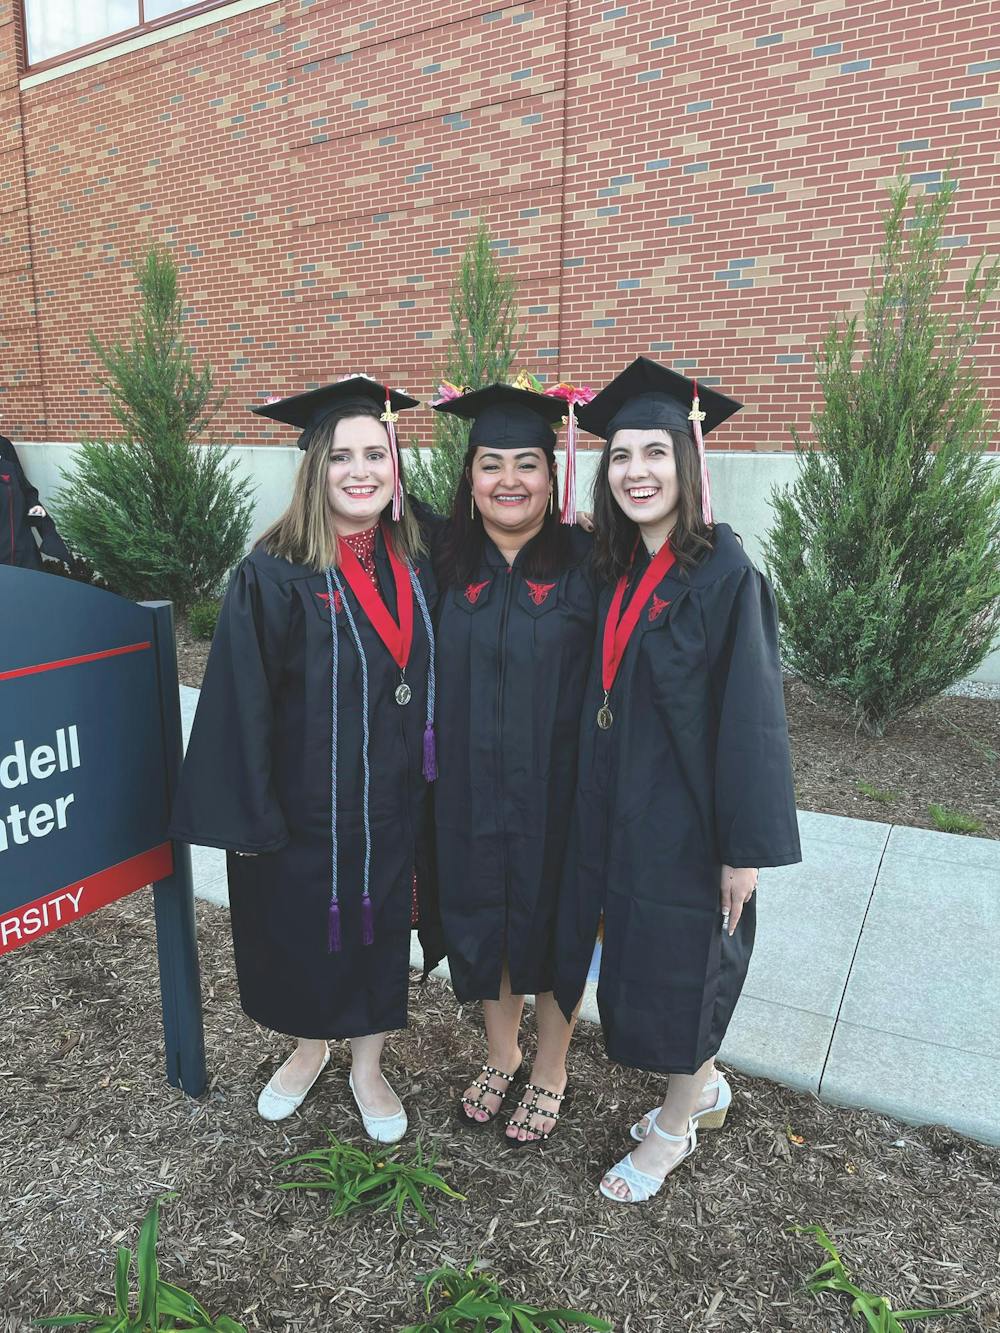 Savannah Oliphant (right) poses for a photo with fellow teaching graduates after graduating from Ball State University in the spring of 2022. Oliphant said she is still connected with many of her teaching friends from Ball State. Savannah Oliphant, Photo Provided